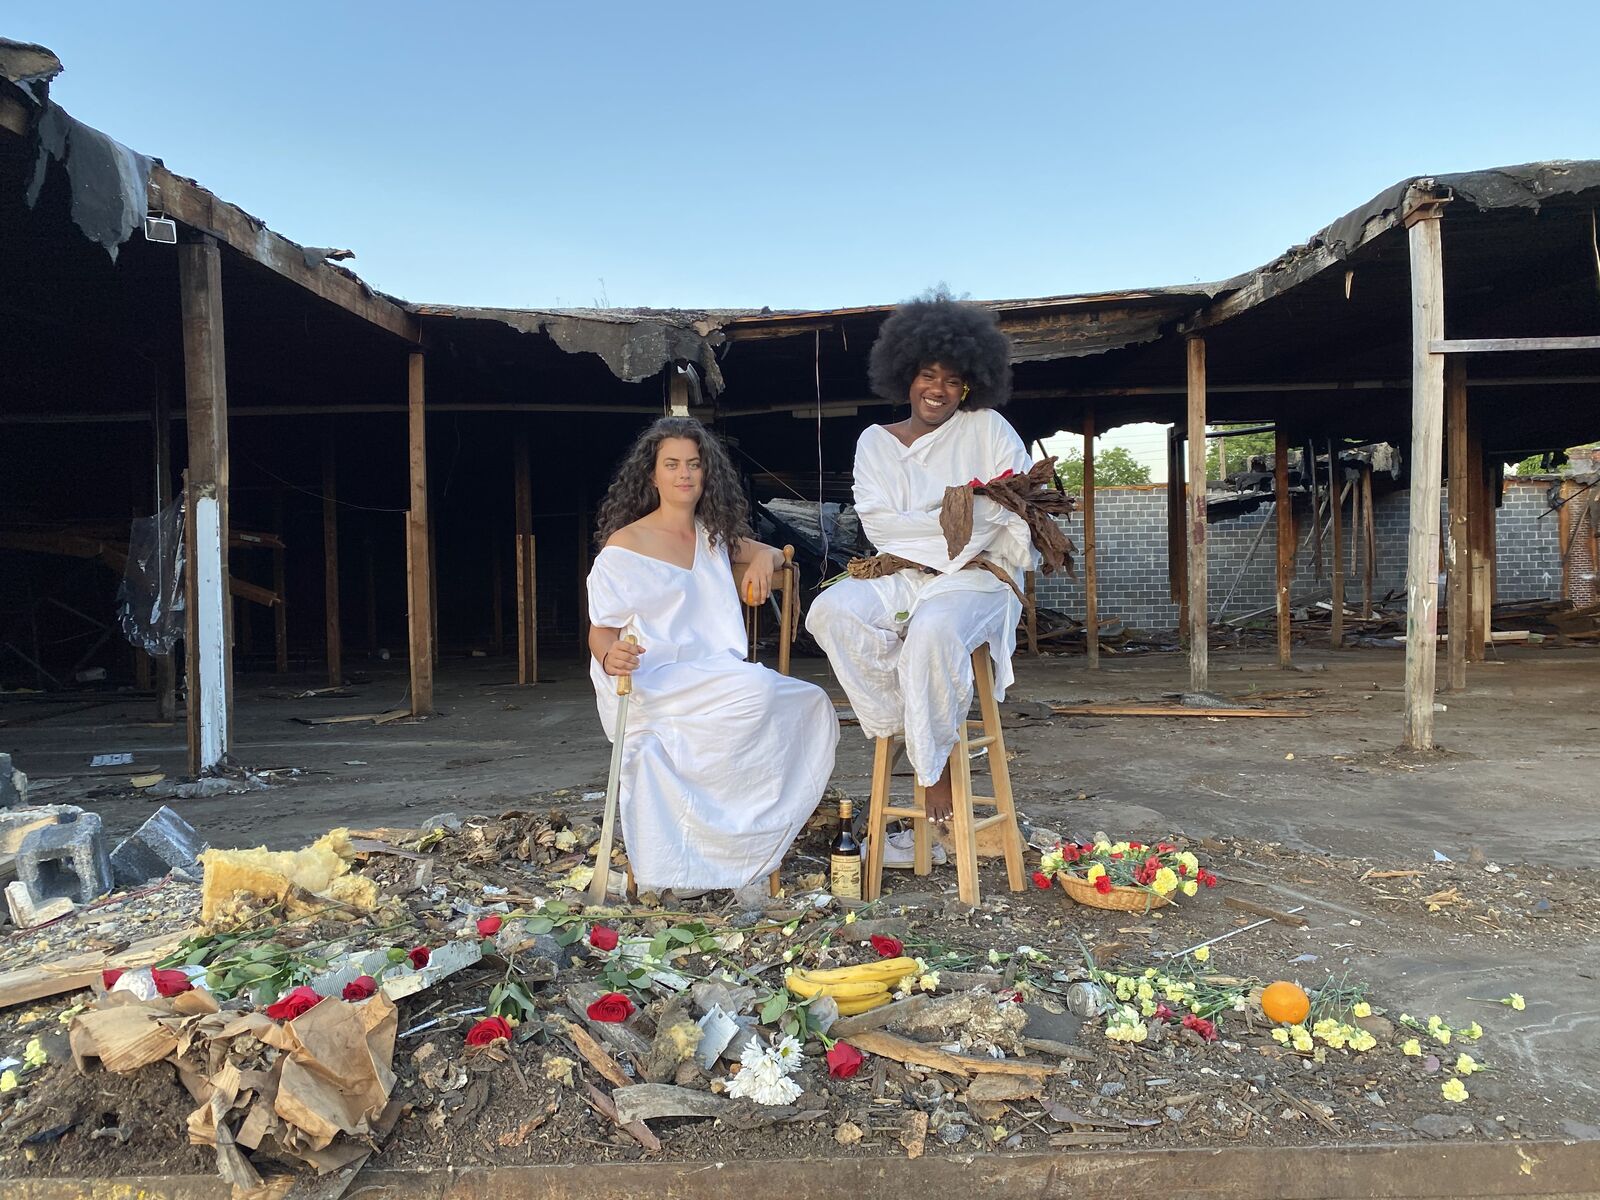 two women seated on stools in an abandoned area surrounded by flowers and food. one of them holds a machete like a walking stick